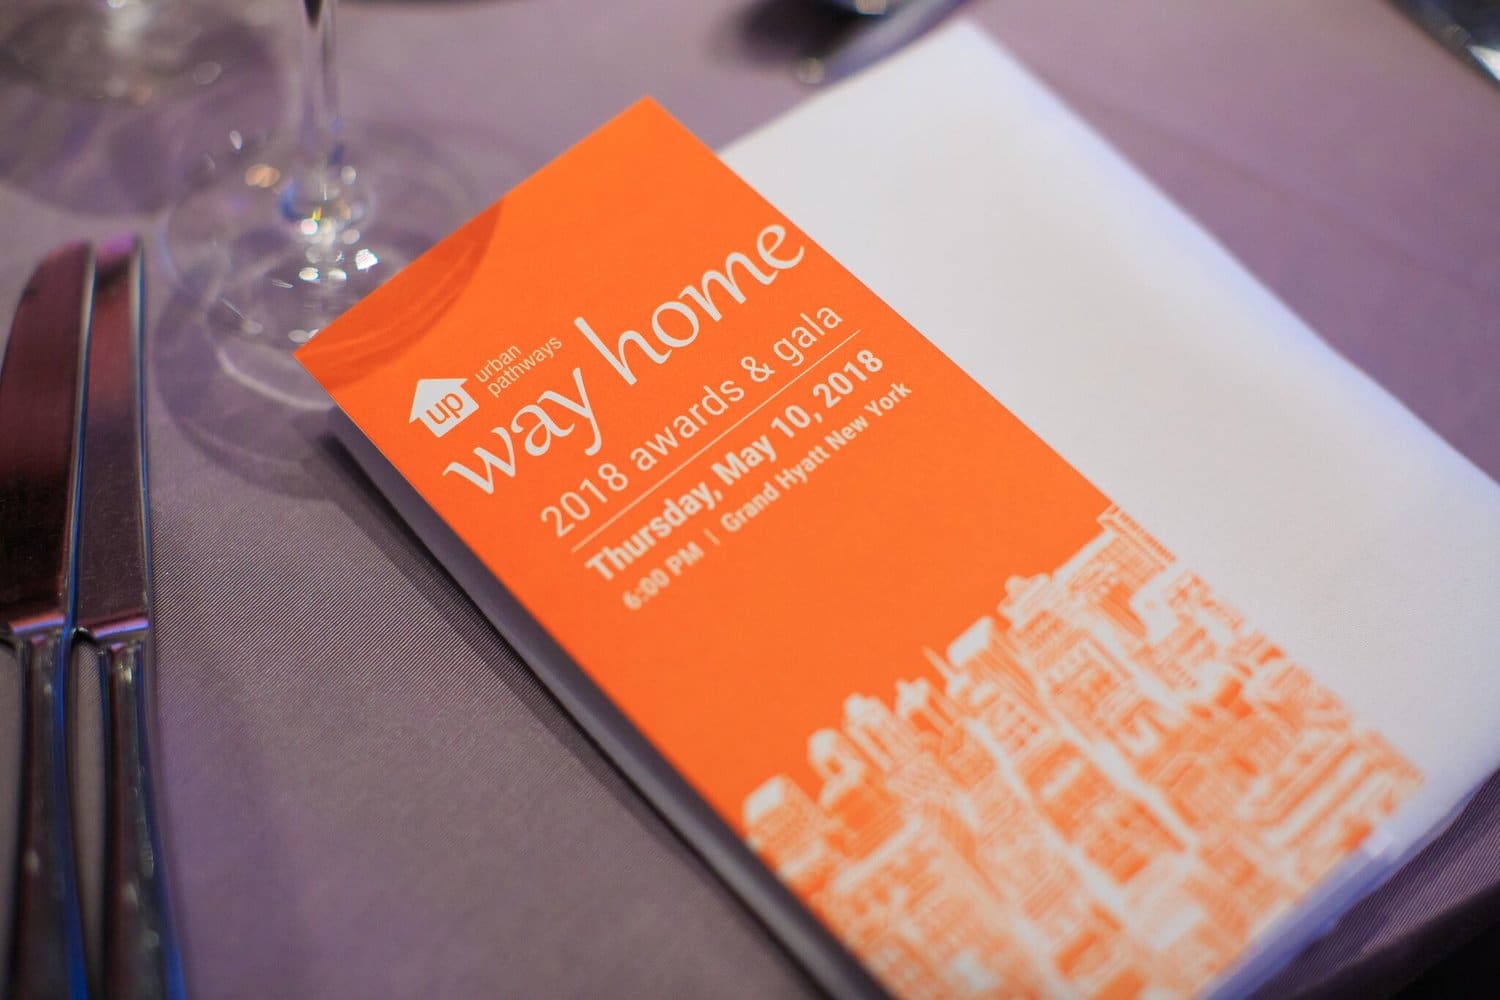 Supporters, influencers, and ambassadors celebrated the work Urban Pathways is doing to change lives, uplift communities and end homelessness at Urban Pathways annual Gala.